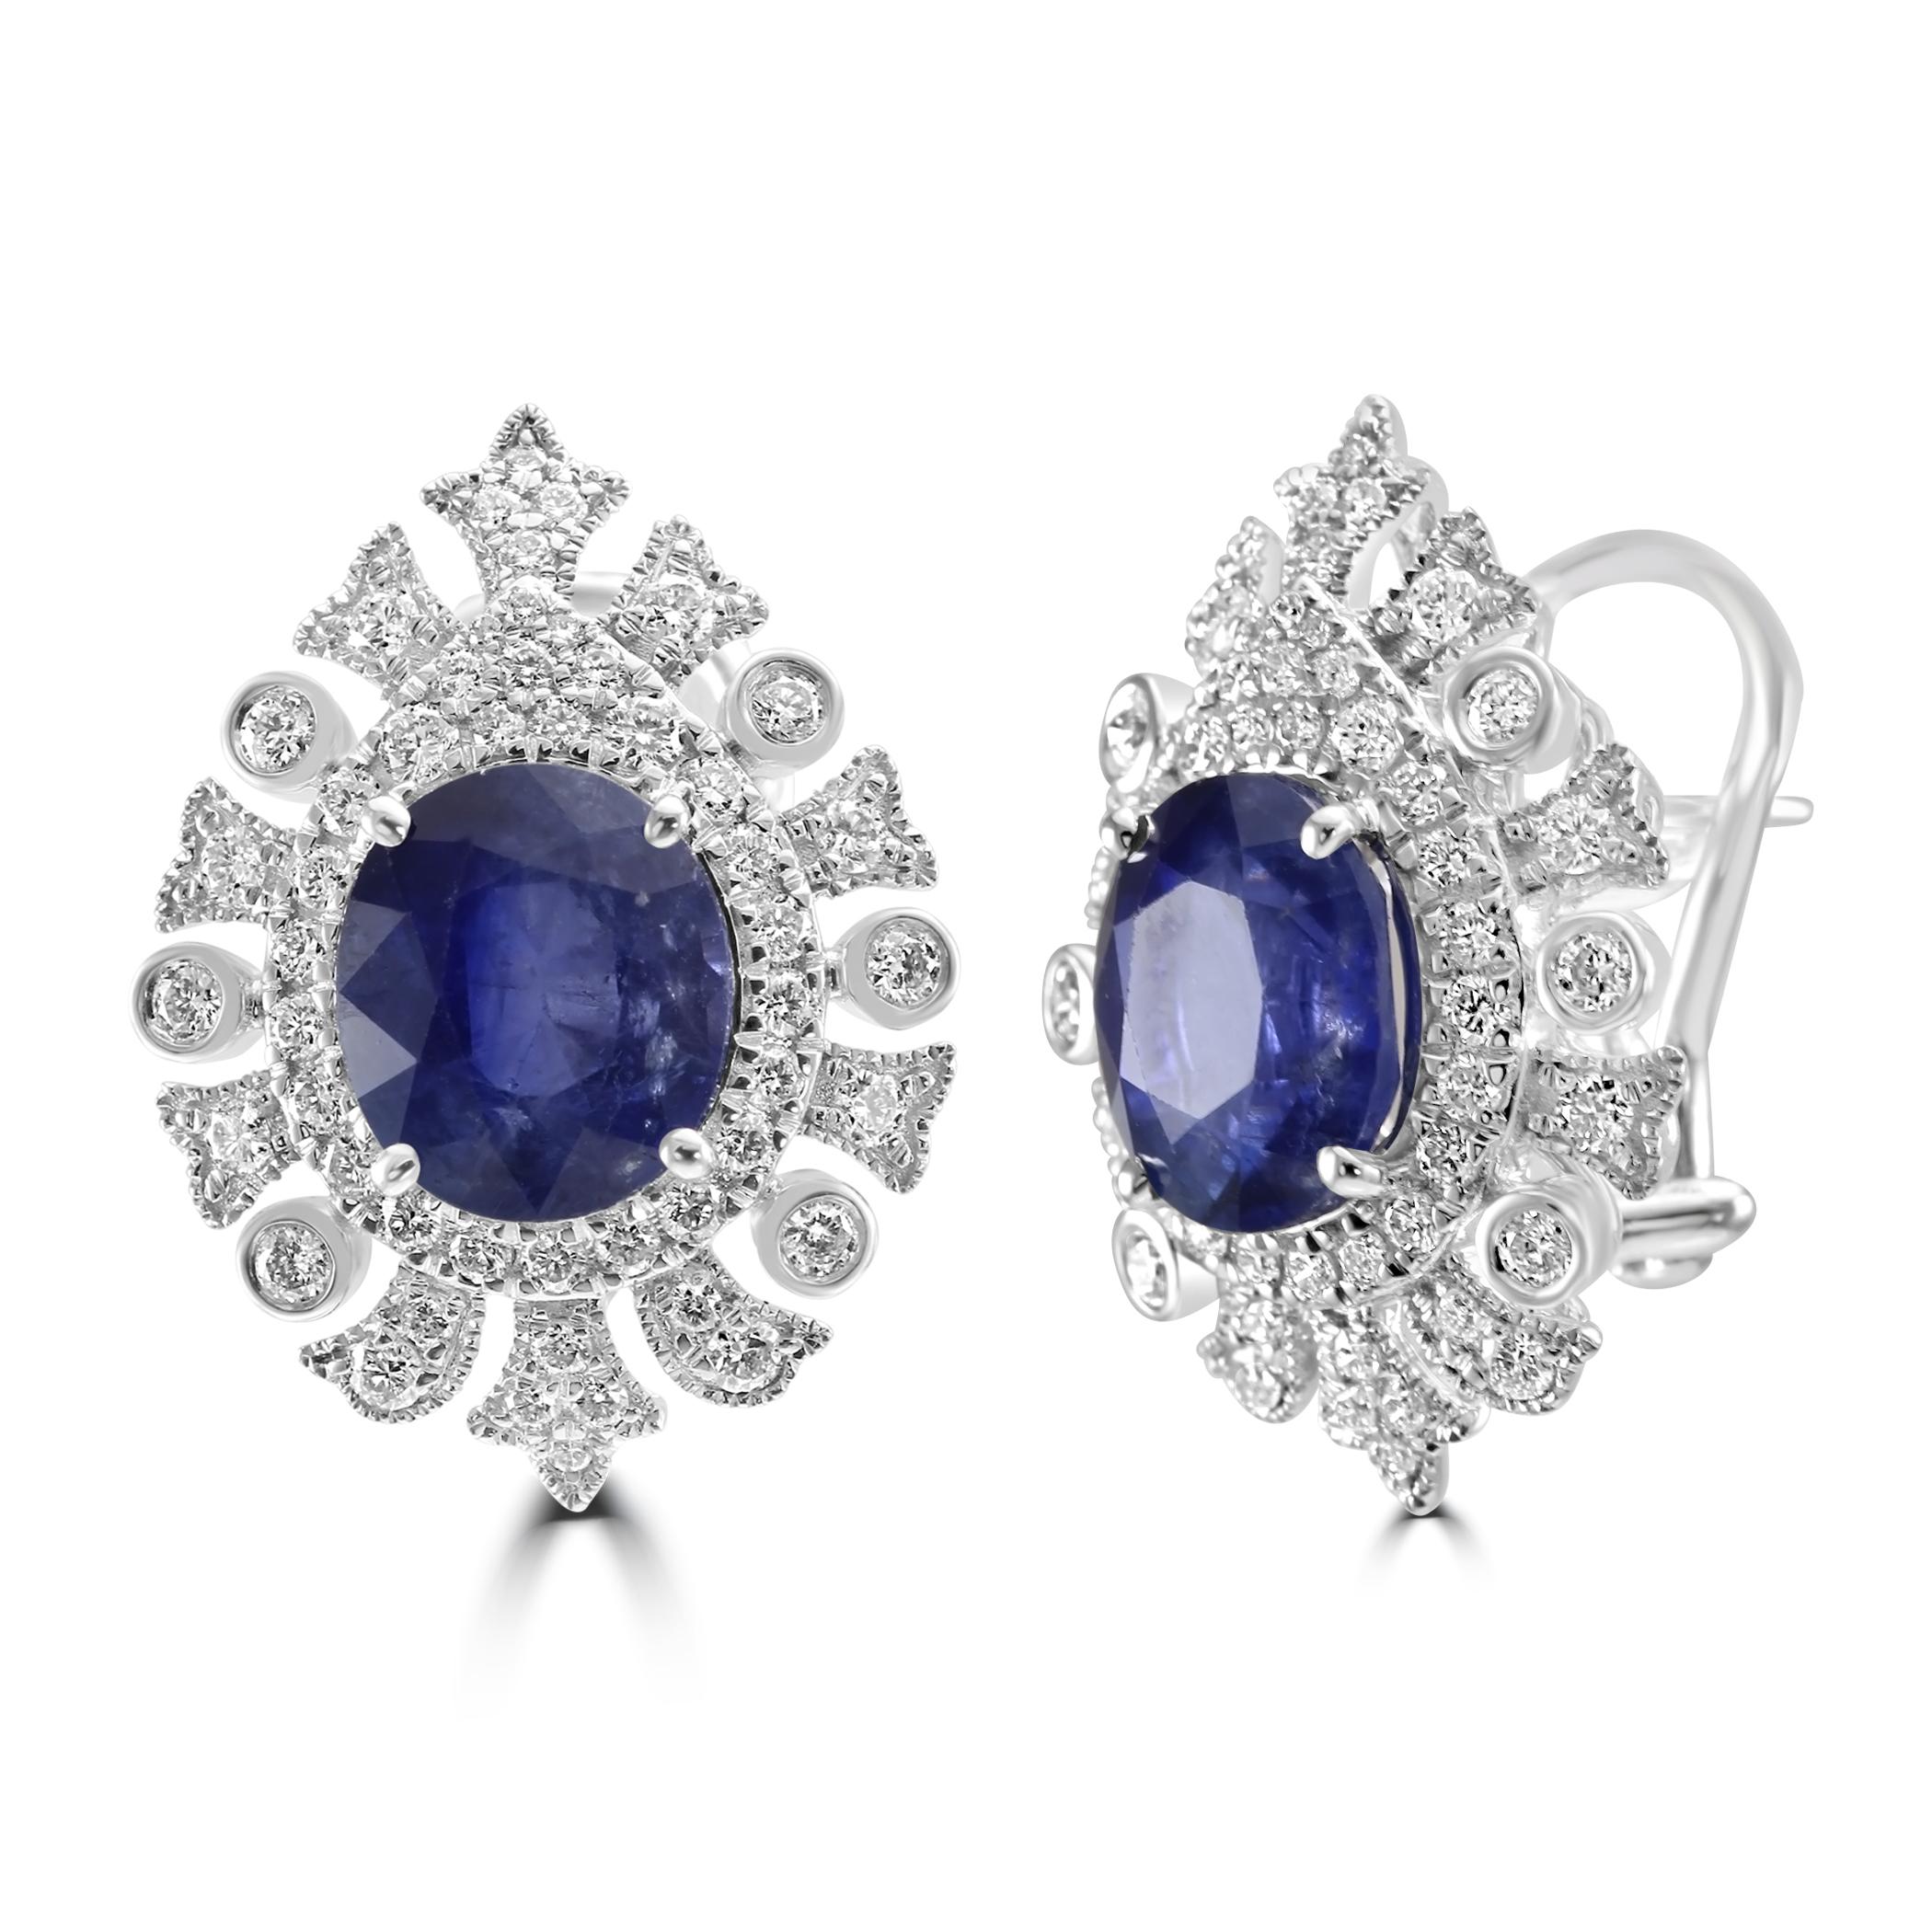 Indulge in luxury with our stunning Ceylon Sapphire earring.

The center stone on these earrings are the magnificent Ceylon Sapphire, known for its deep, velvety blue color. Combine that with the substantial size of 6.53 carats, these sapphires are